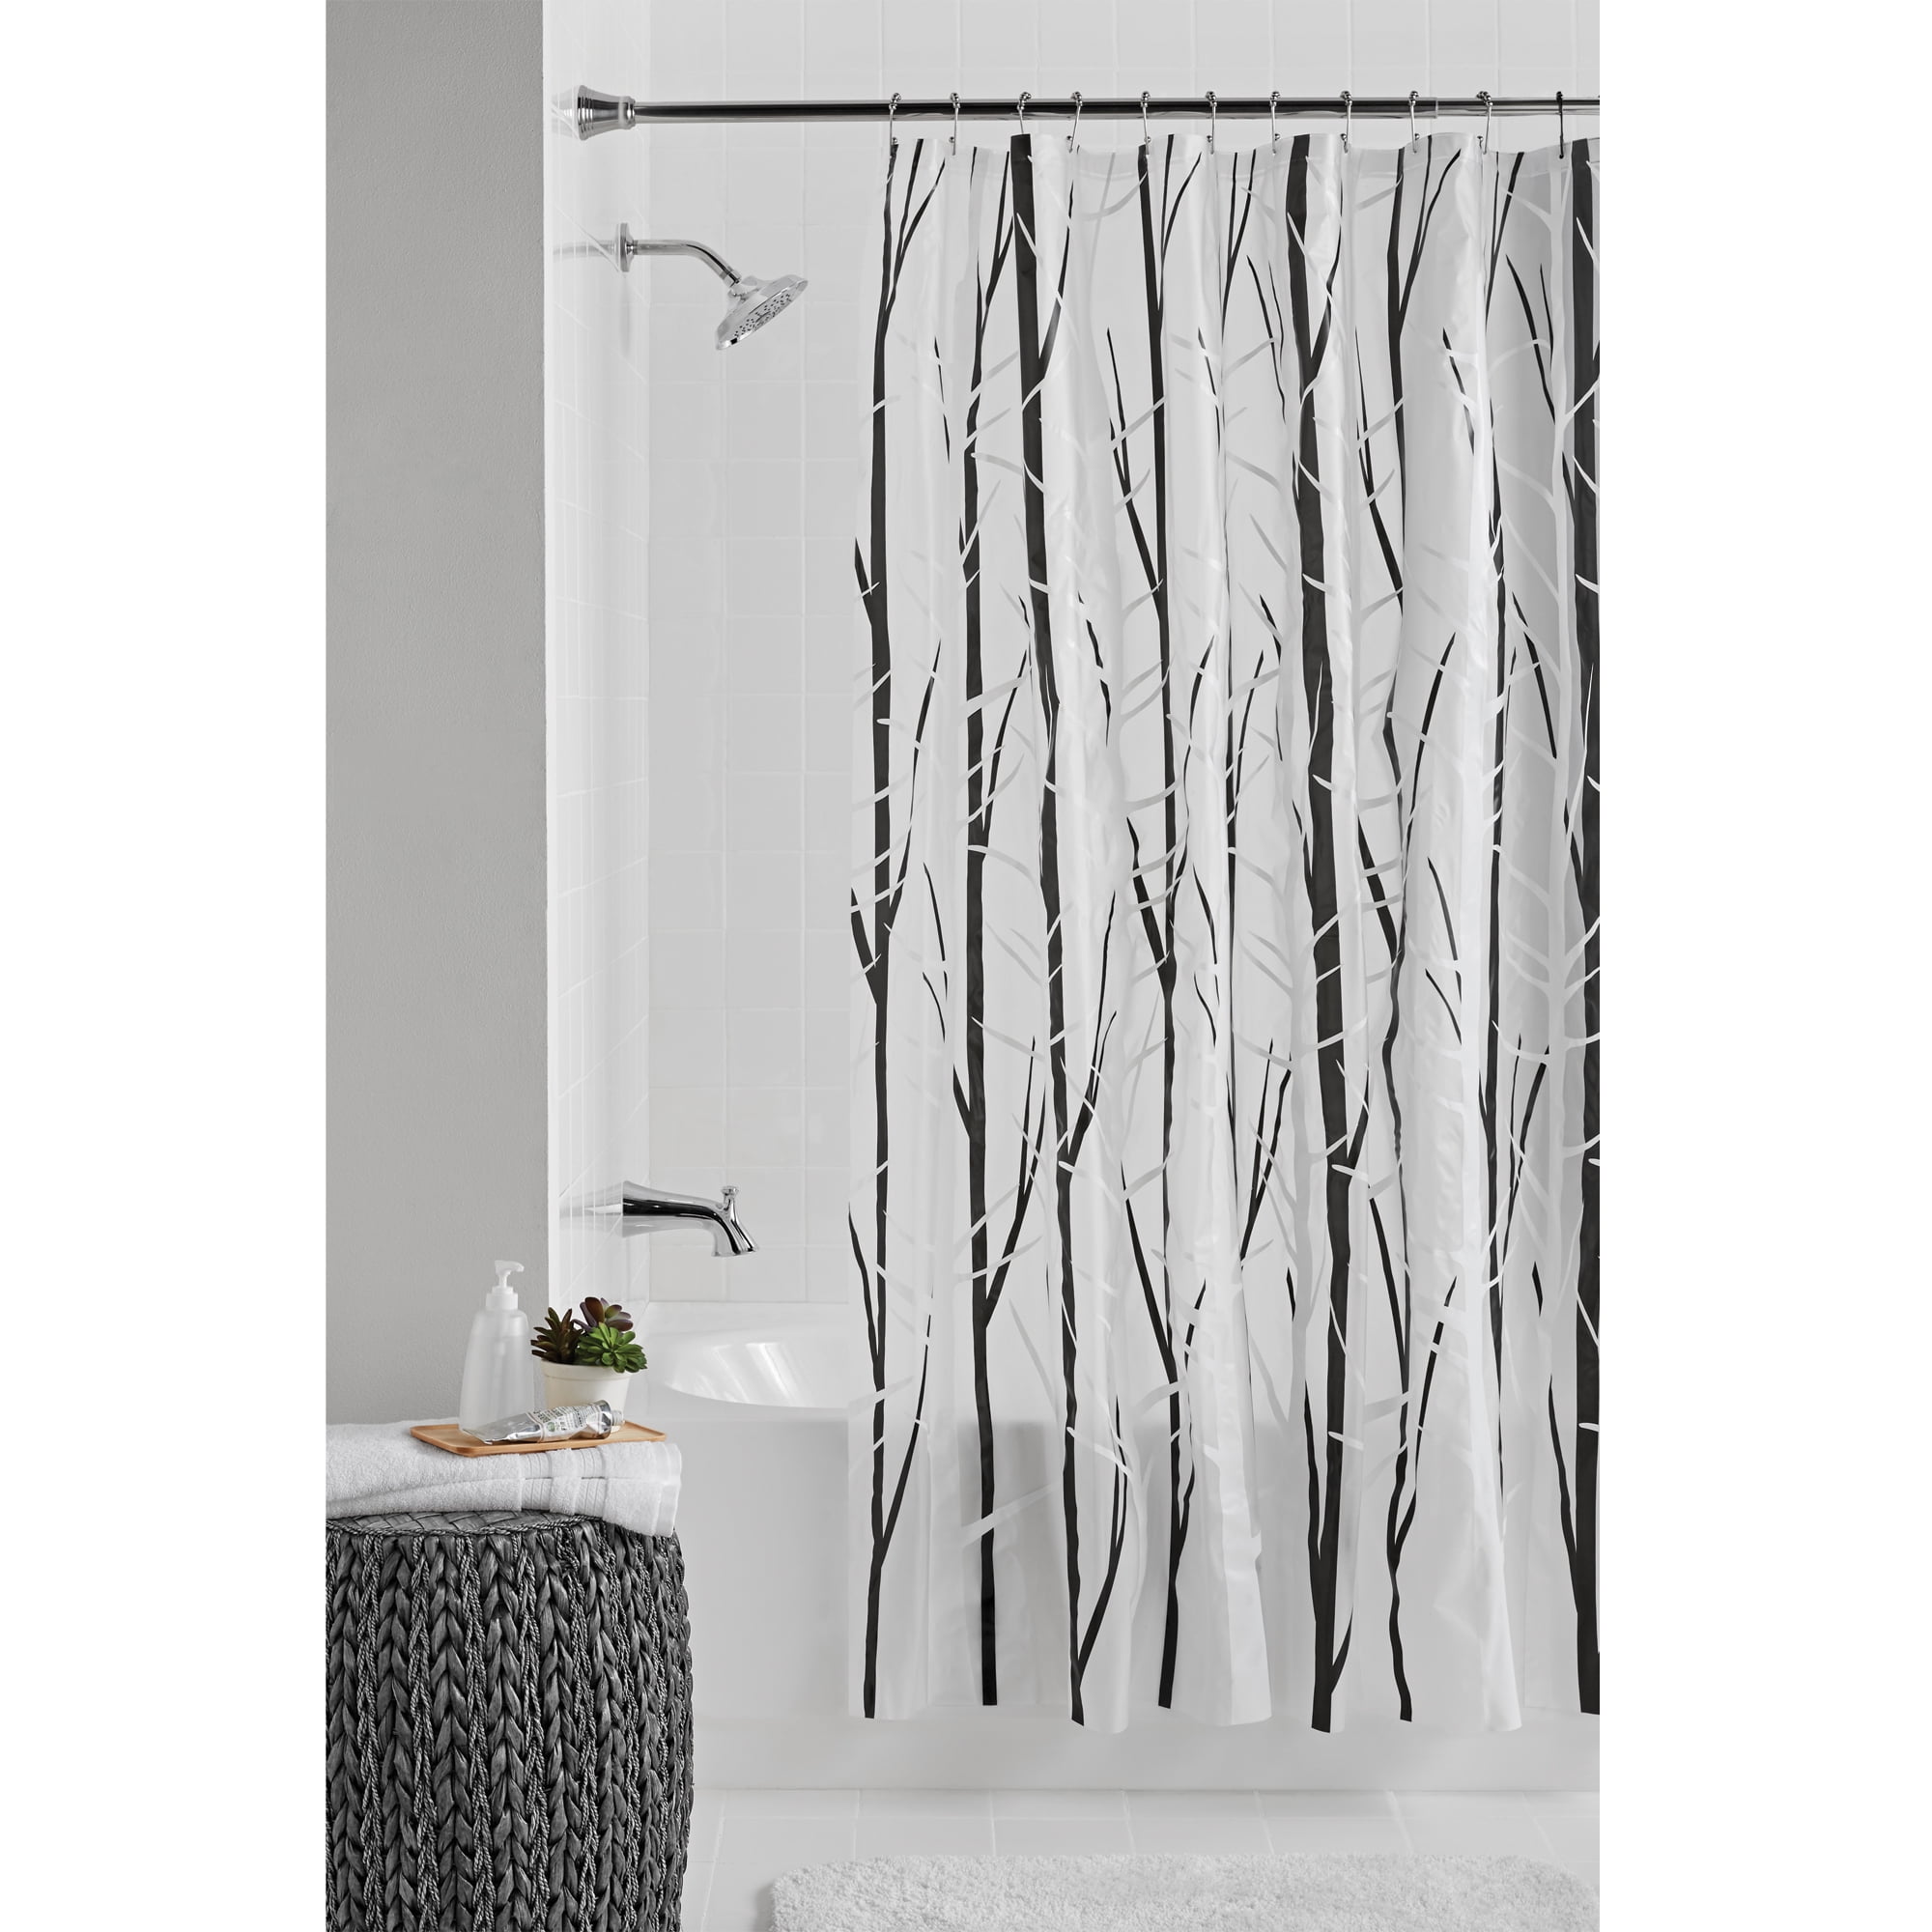 Mainstays Woodland 70 X 72 Peva Black, Mainstays Water Repellent 70 X 72 Fabric Shower Curtain Or Liner